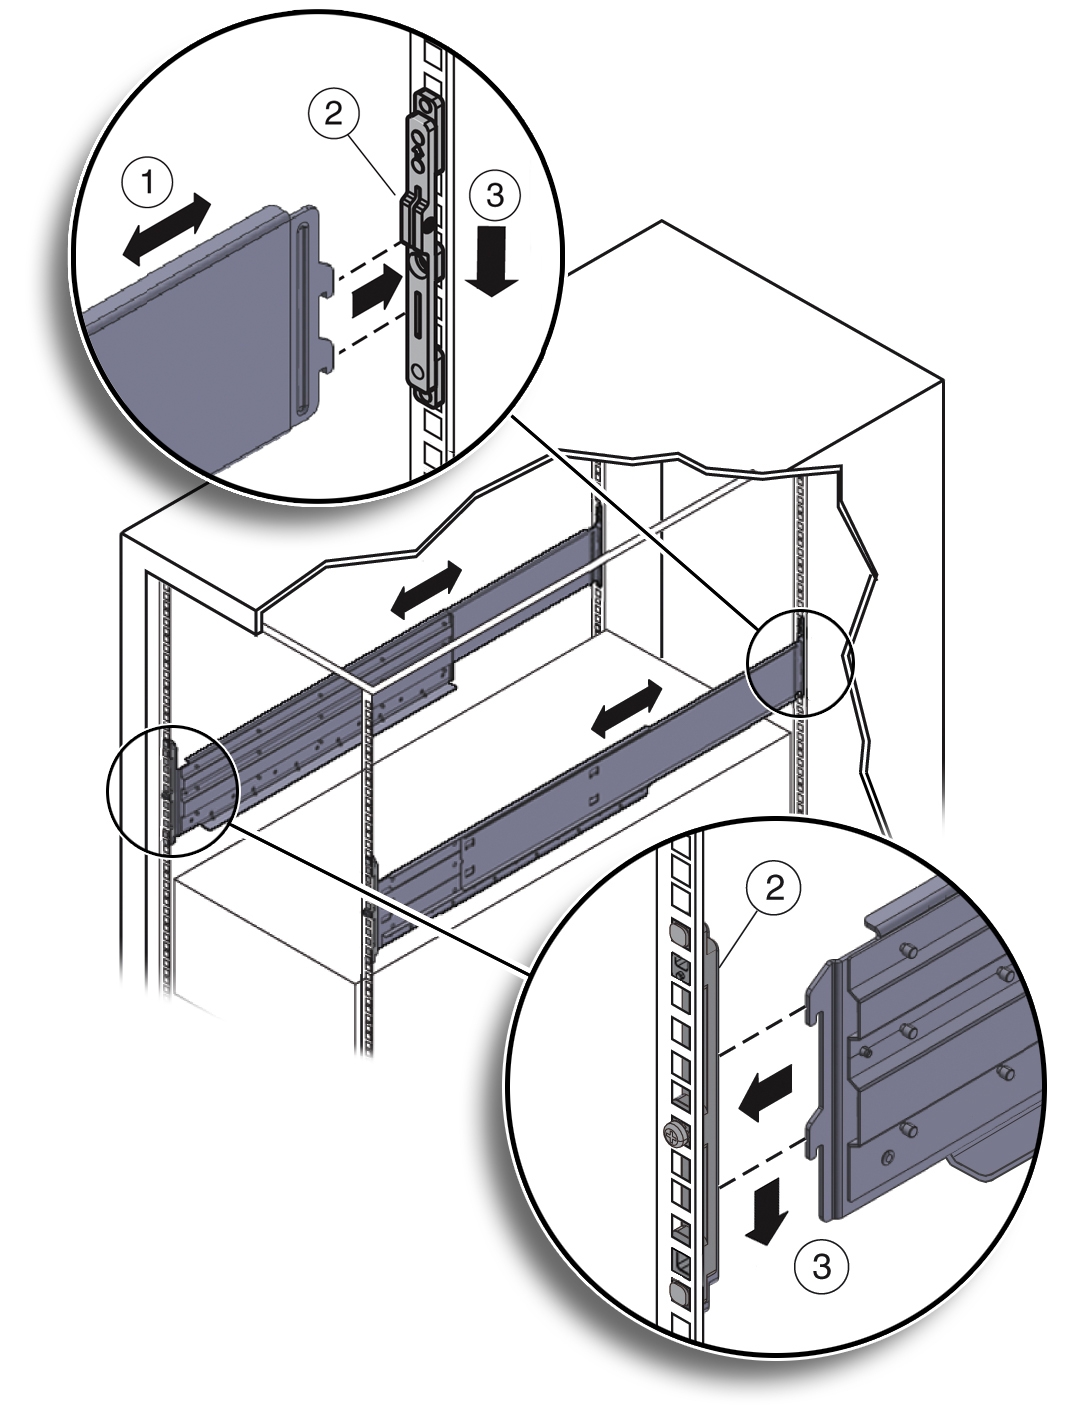 image:Graphic showing how to insert the shelf rails into the rack.